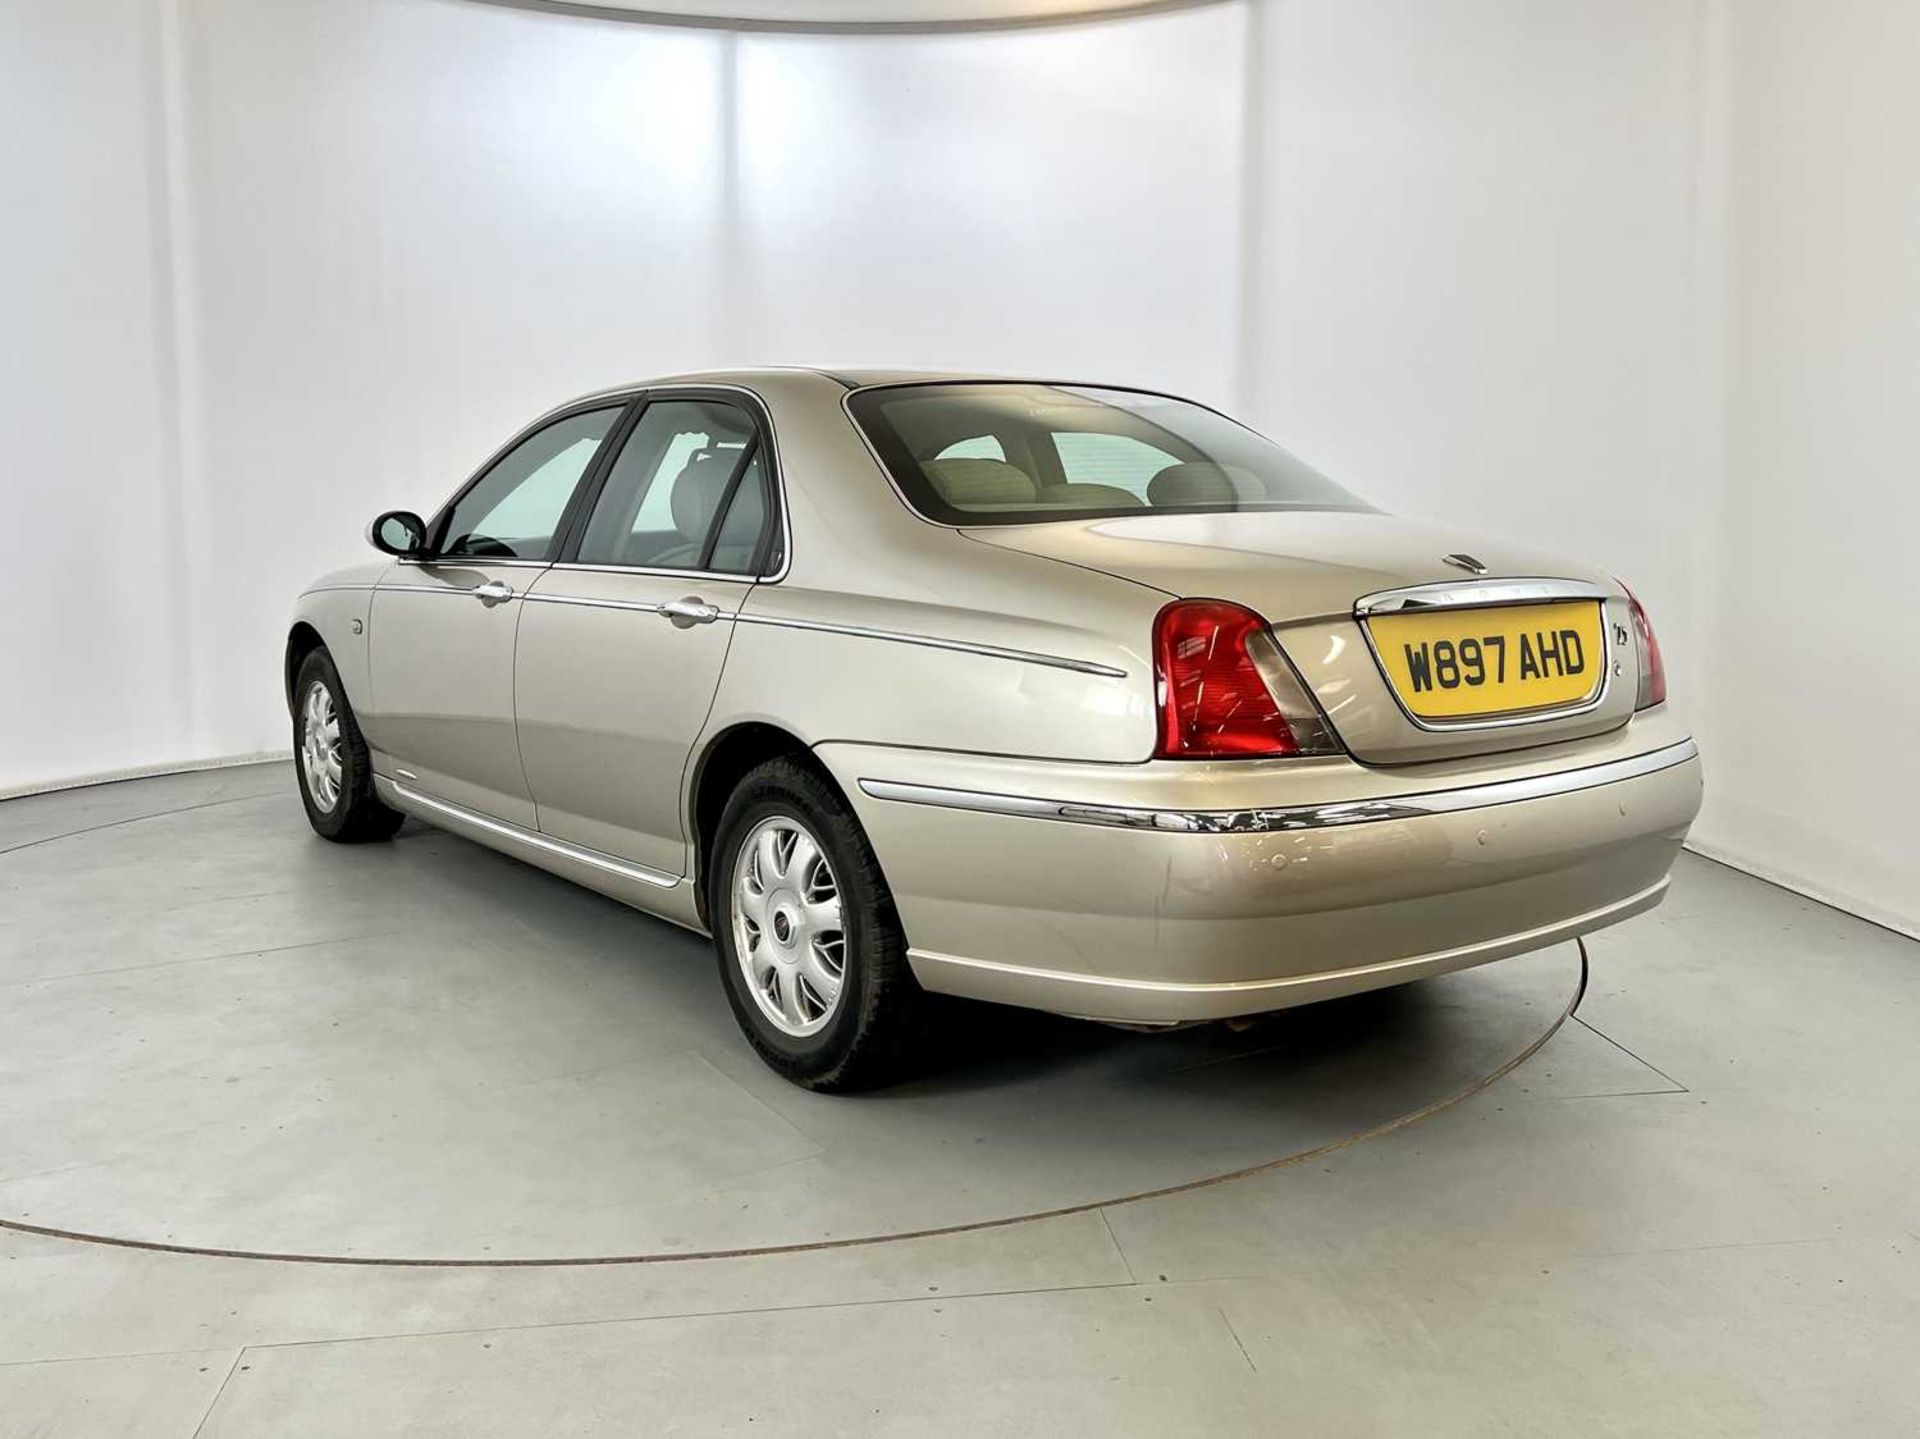 2000 Rover 75 Connoisseur - Image 7 of 34